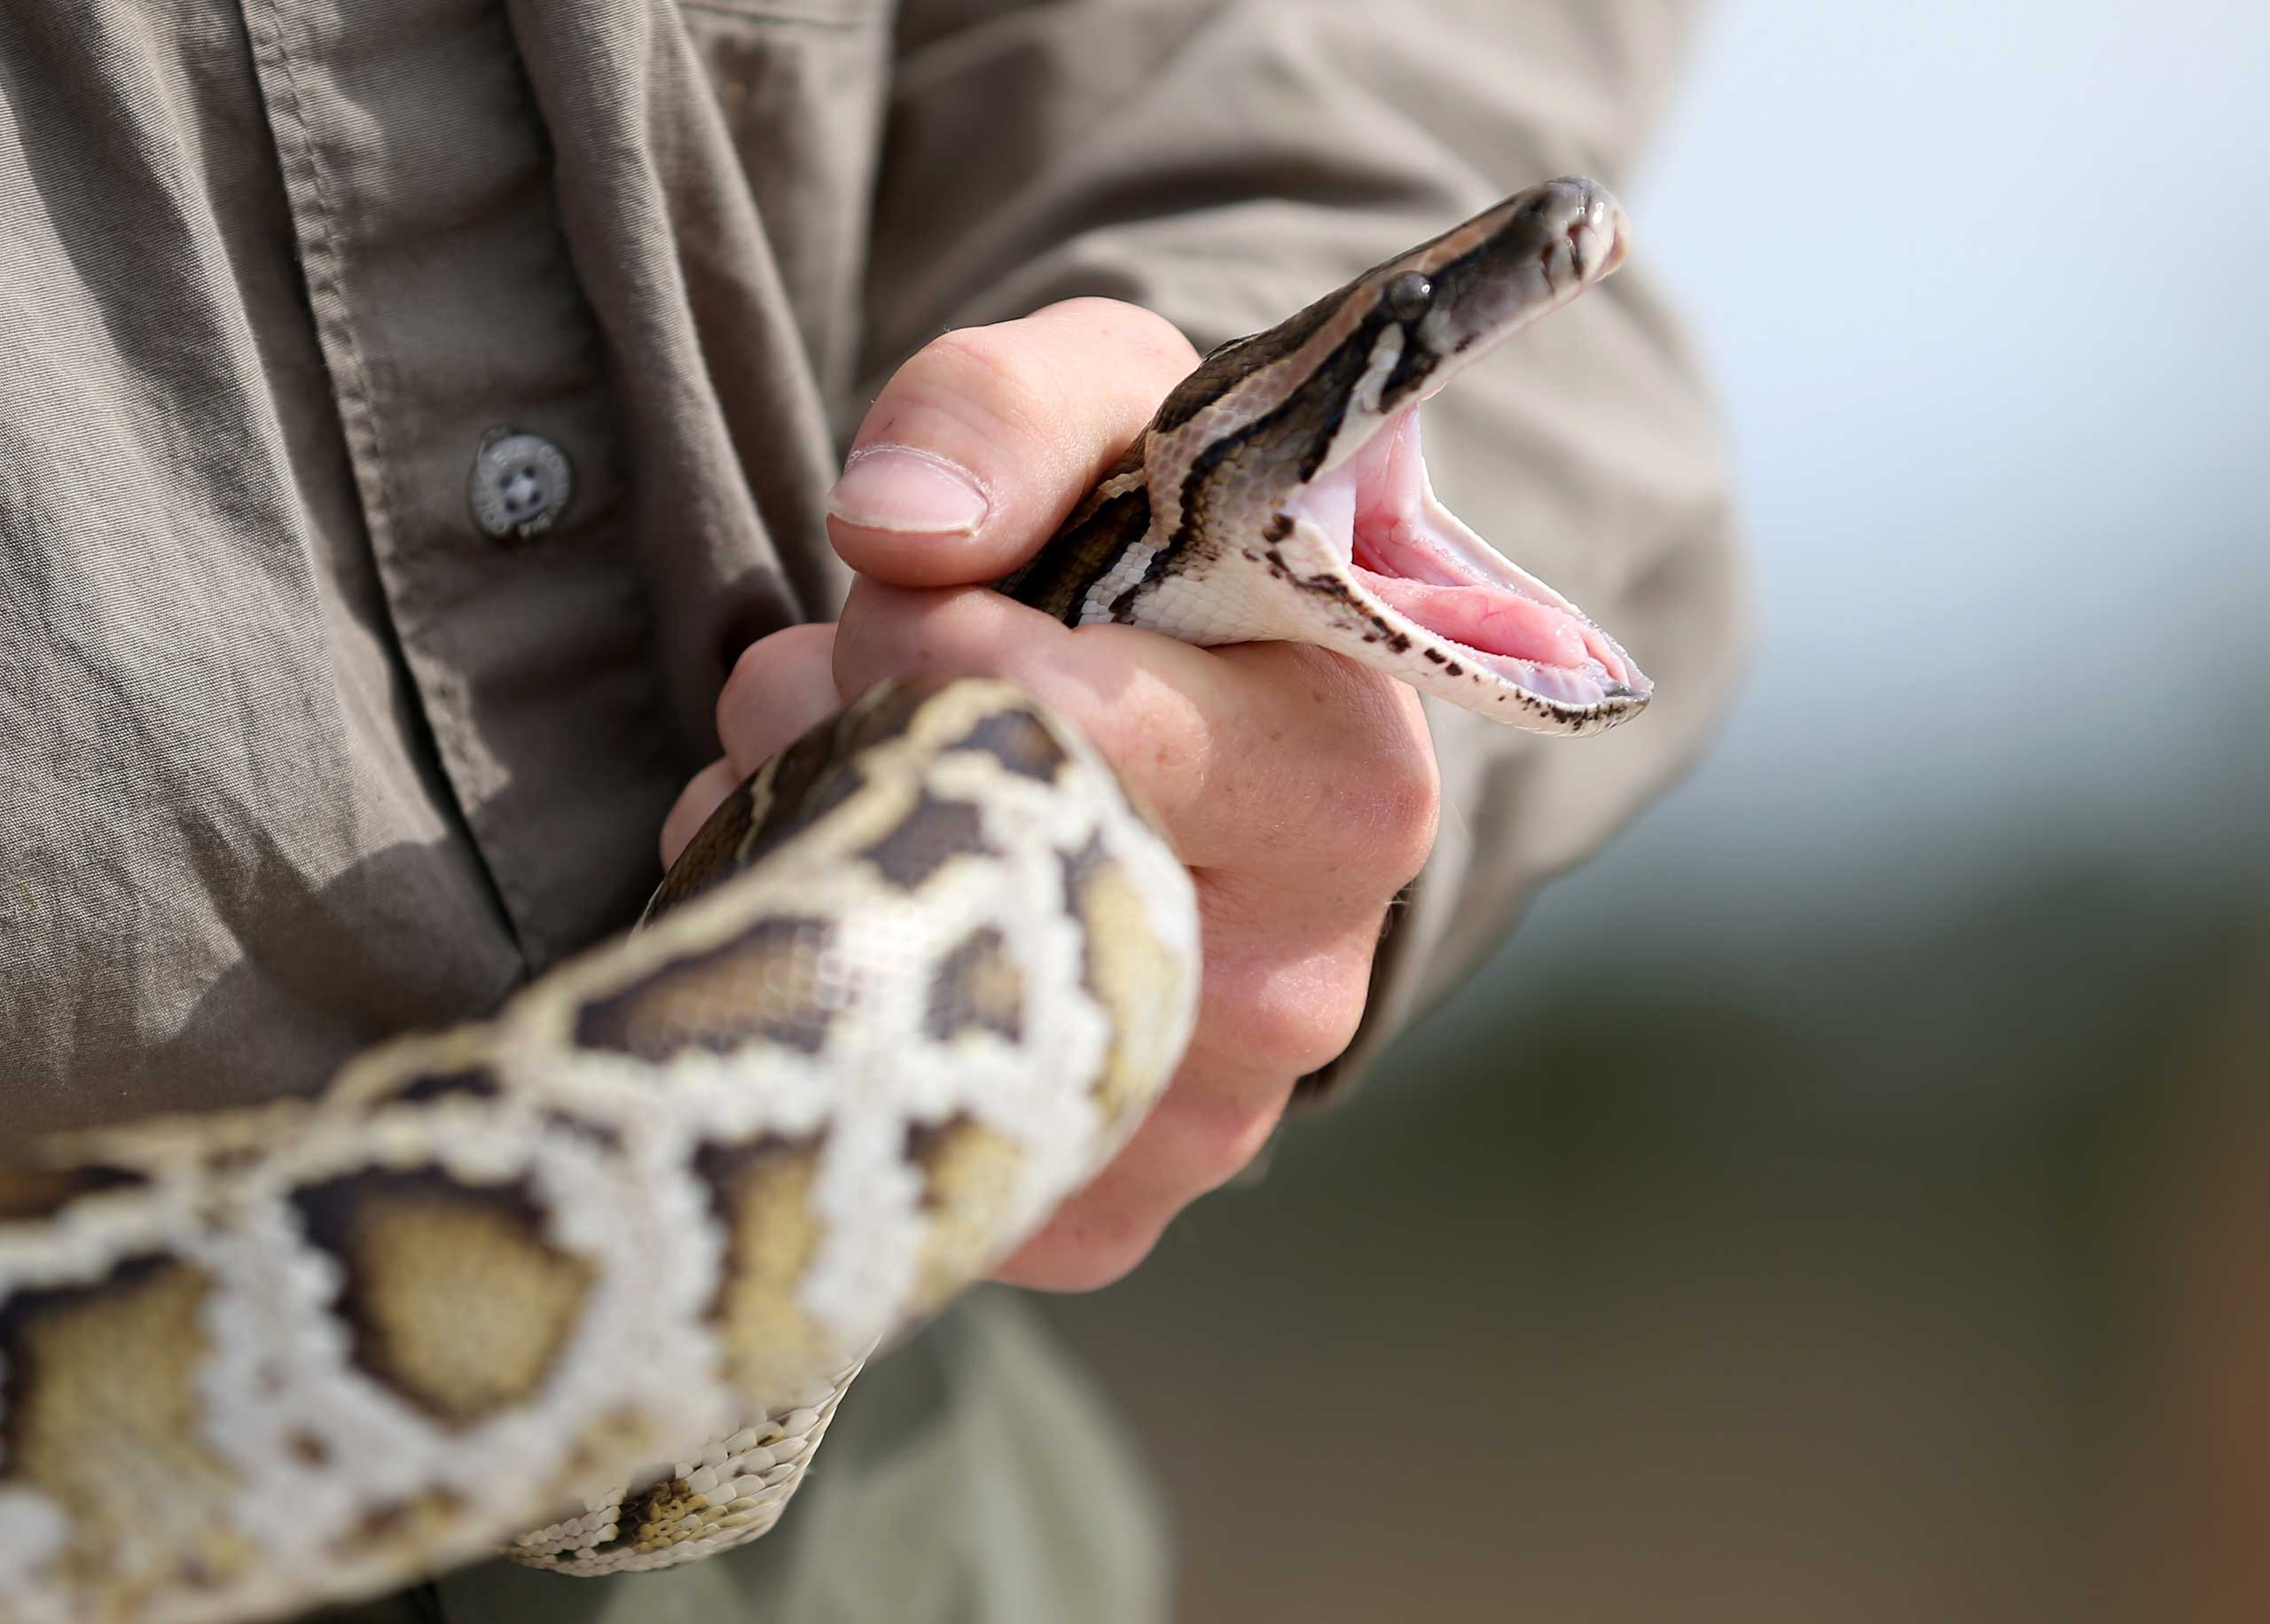 Biologists Track Northern African Pythons In Florida's Everglades